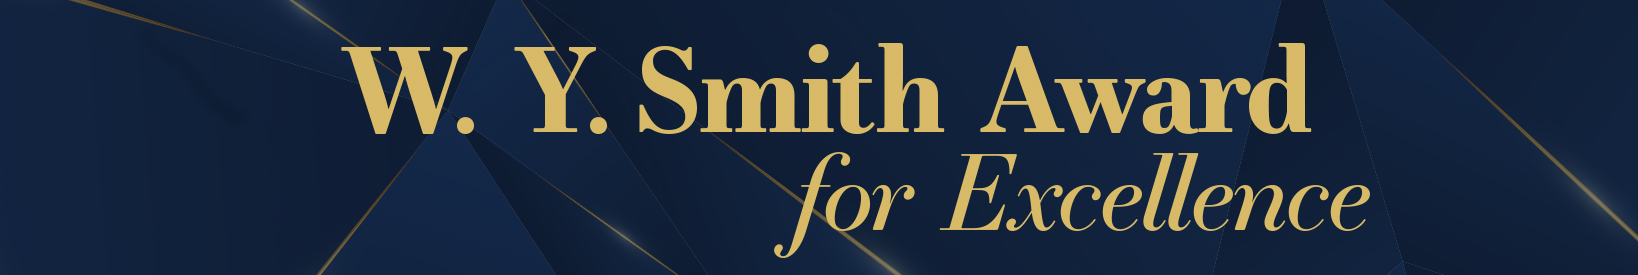 W.Y. Smith Award for Excellence